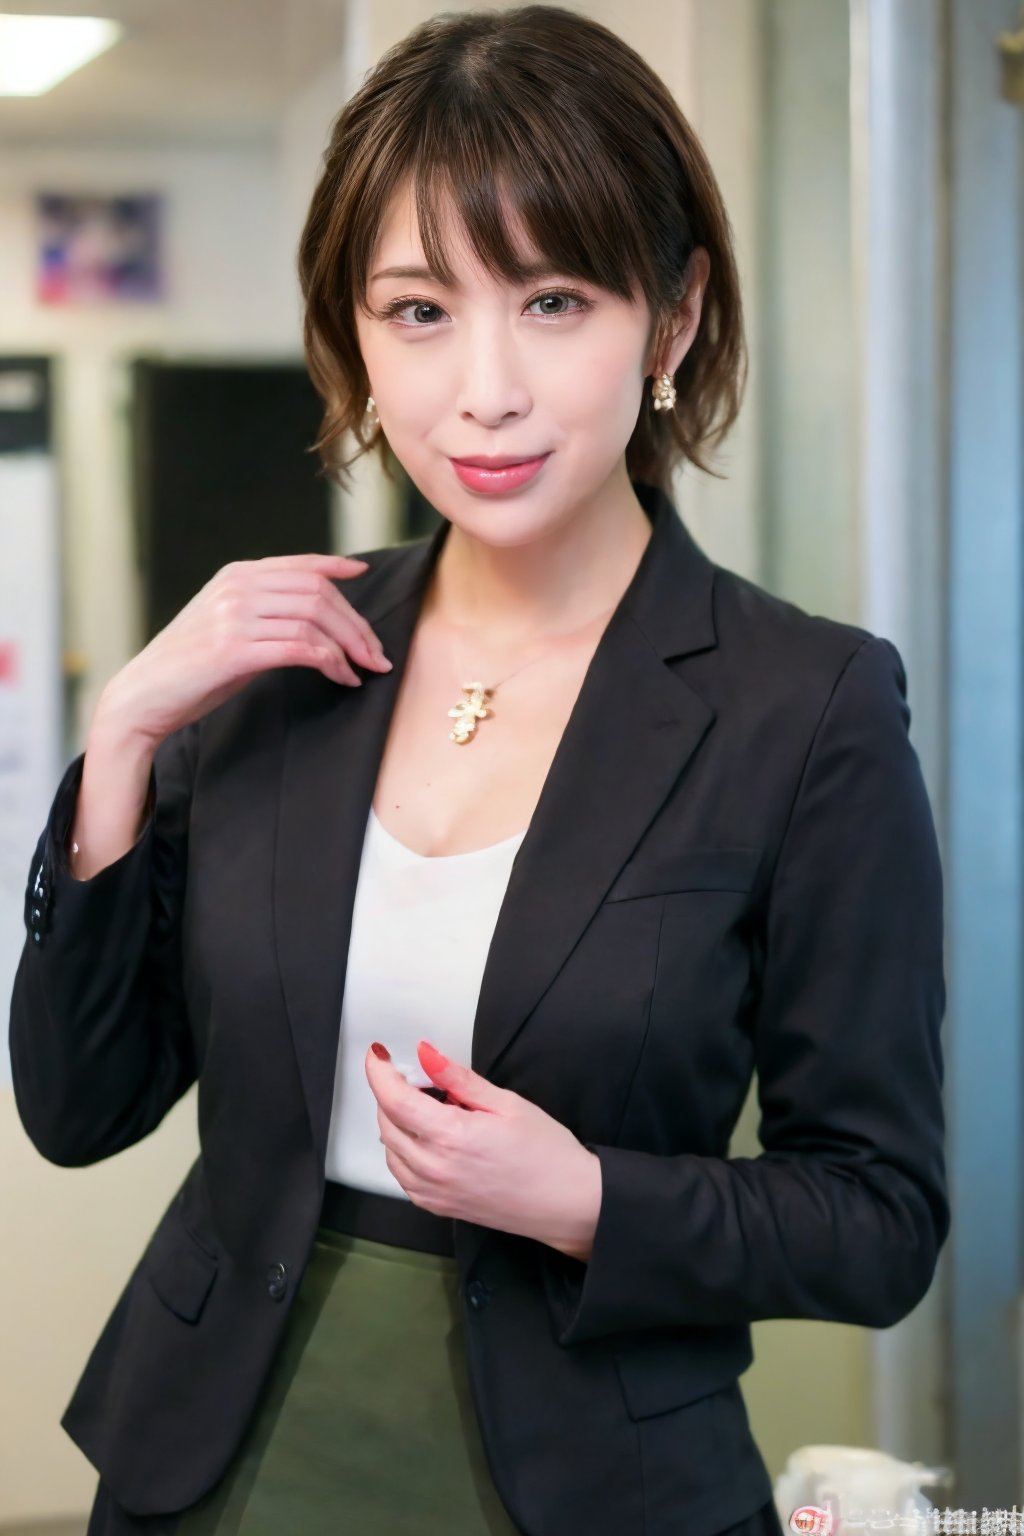 upper body, (plump:1.2), smile, 1 Japan Woman,  A MILF,  40 years old, Seductive smile、naughty expression、 (8K,  (Raw photo:1.2),  (Photorealistic:1.3),  Realistic,  Photorealistic,  Best Quality,  absurderes, depth of fields,  超A high resolution,  masutepiece,  chromatic abberation:1.1)),  (Looking at Viewer:1.21),  (1milf in,  Office Lady:1.331), (toppless),  ((OL business blazer_Tight skirt:1.5)), (Breast Focus:1.1),  Necklace,  earrings,  Long sleeves,  thighs thighs thighs thighs,  Short skirt,  Lace dress,  pencil skirts,  high-heels,  in a office,  Indoors,  folder,  a computer, wakudamayuko, hinagataakiko,<lora:EMS-179-EMS:0.400000>,<lora:EMS-278443-EMS:0.800000>